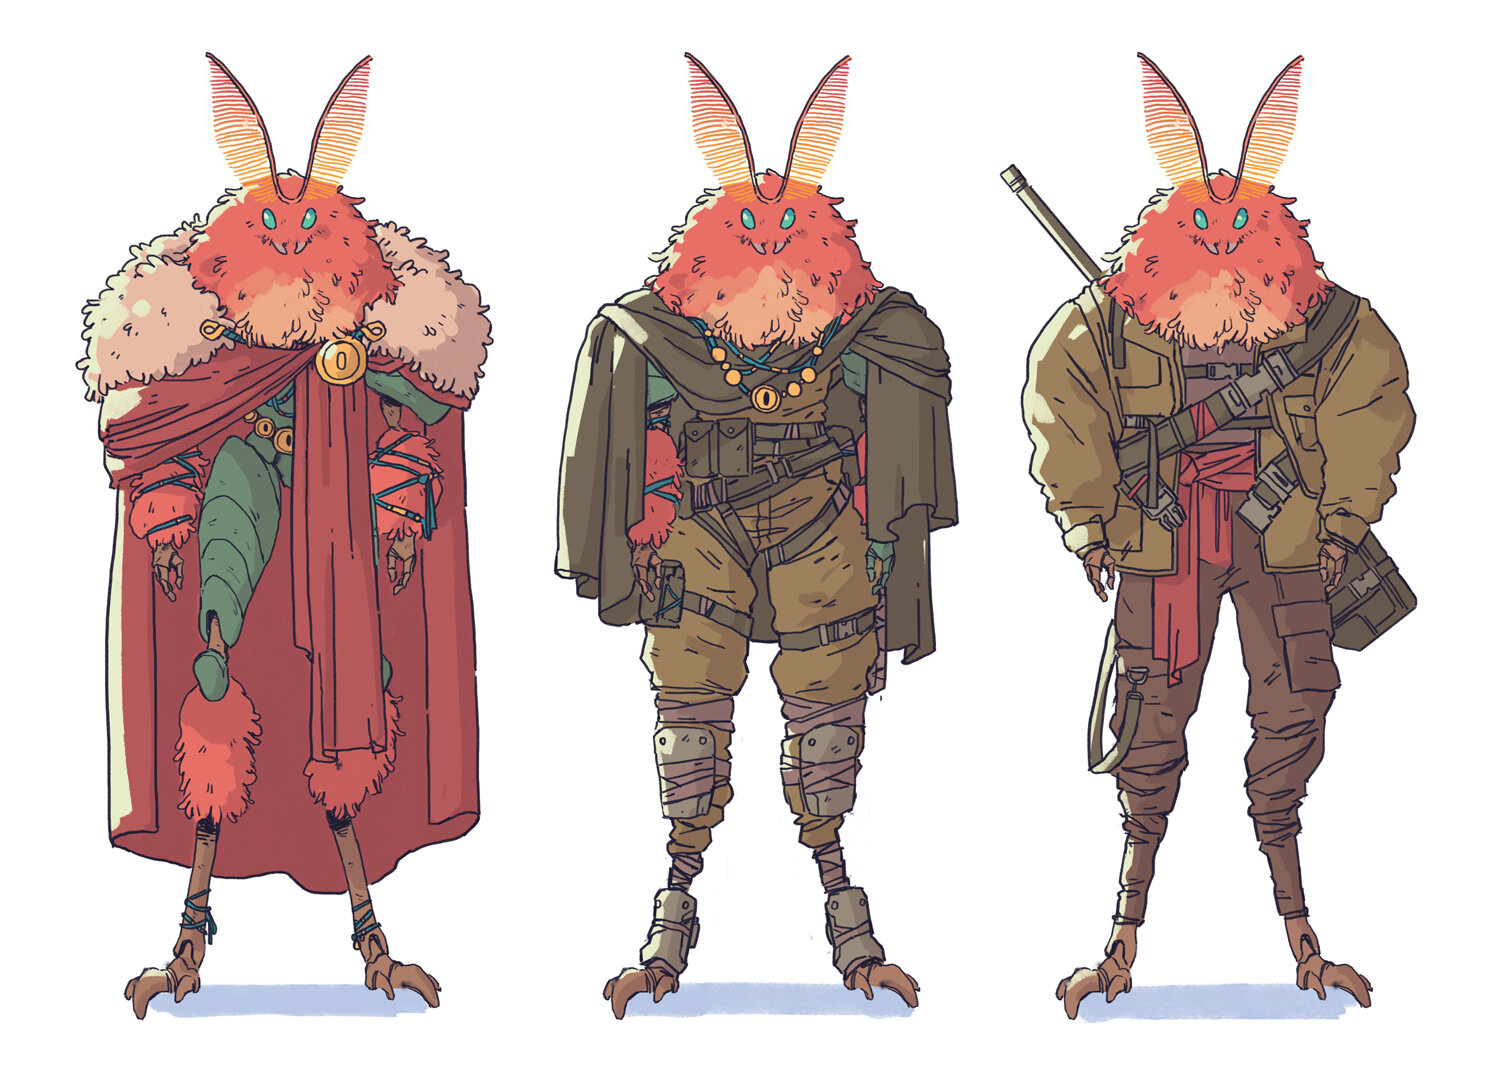  Early ideation for Lancer RPG expansion “No Room for a Wallflower” (Massif Press) 